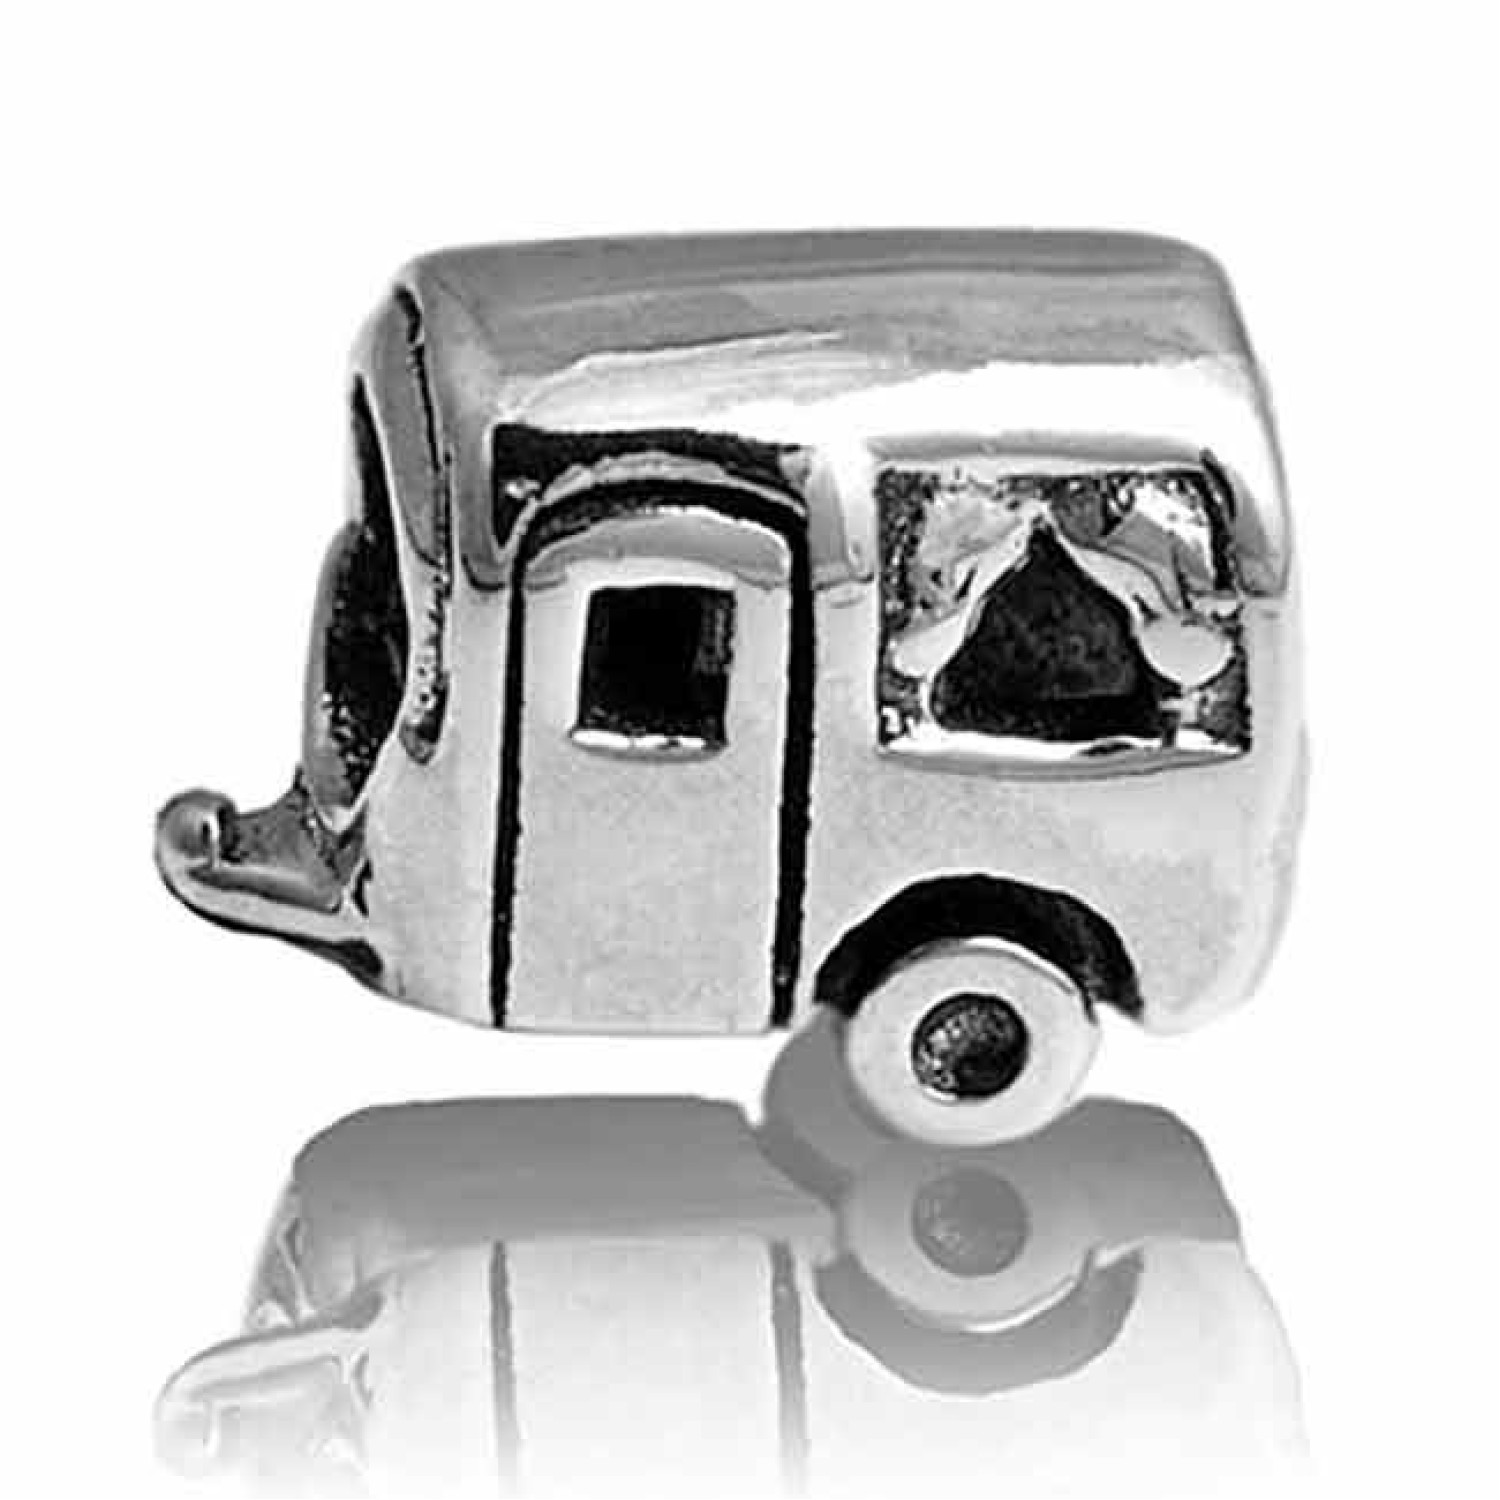 LK061 Evolve  Caravan Charm. Evolve Caravan Charm Jewellery Caravans are a traditional part of the New Zealand summer holiday.  Whether parked up in a Kiwi camp ground, at the beach, on the back lawn or at the bach (Kiwi holiday home), the cara @christies